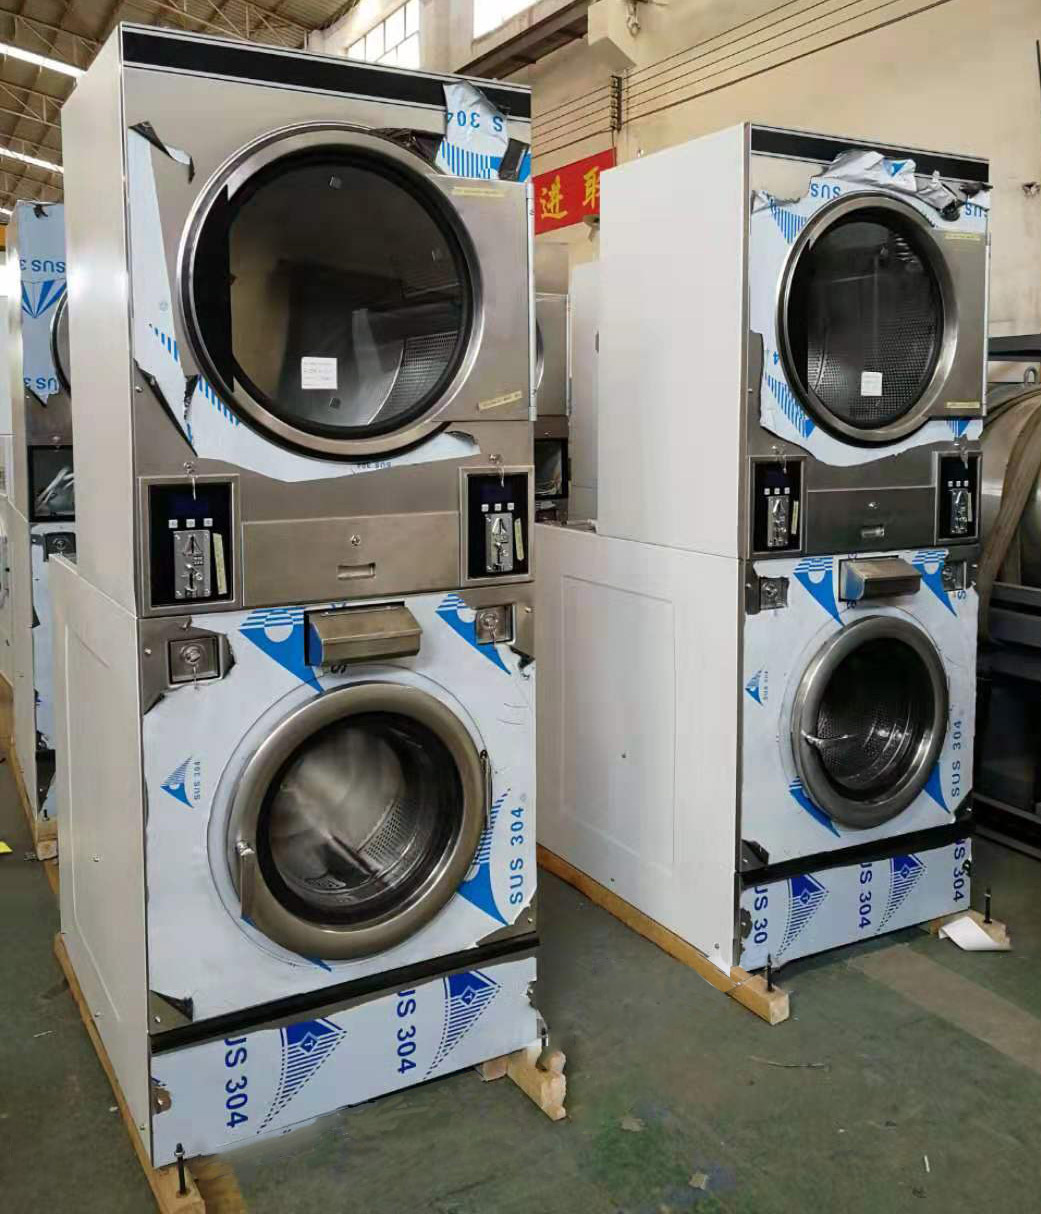 GOWORLD stainless steel self service laundry equipment LPG gas heating for hotel